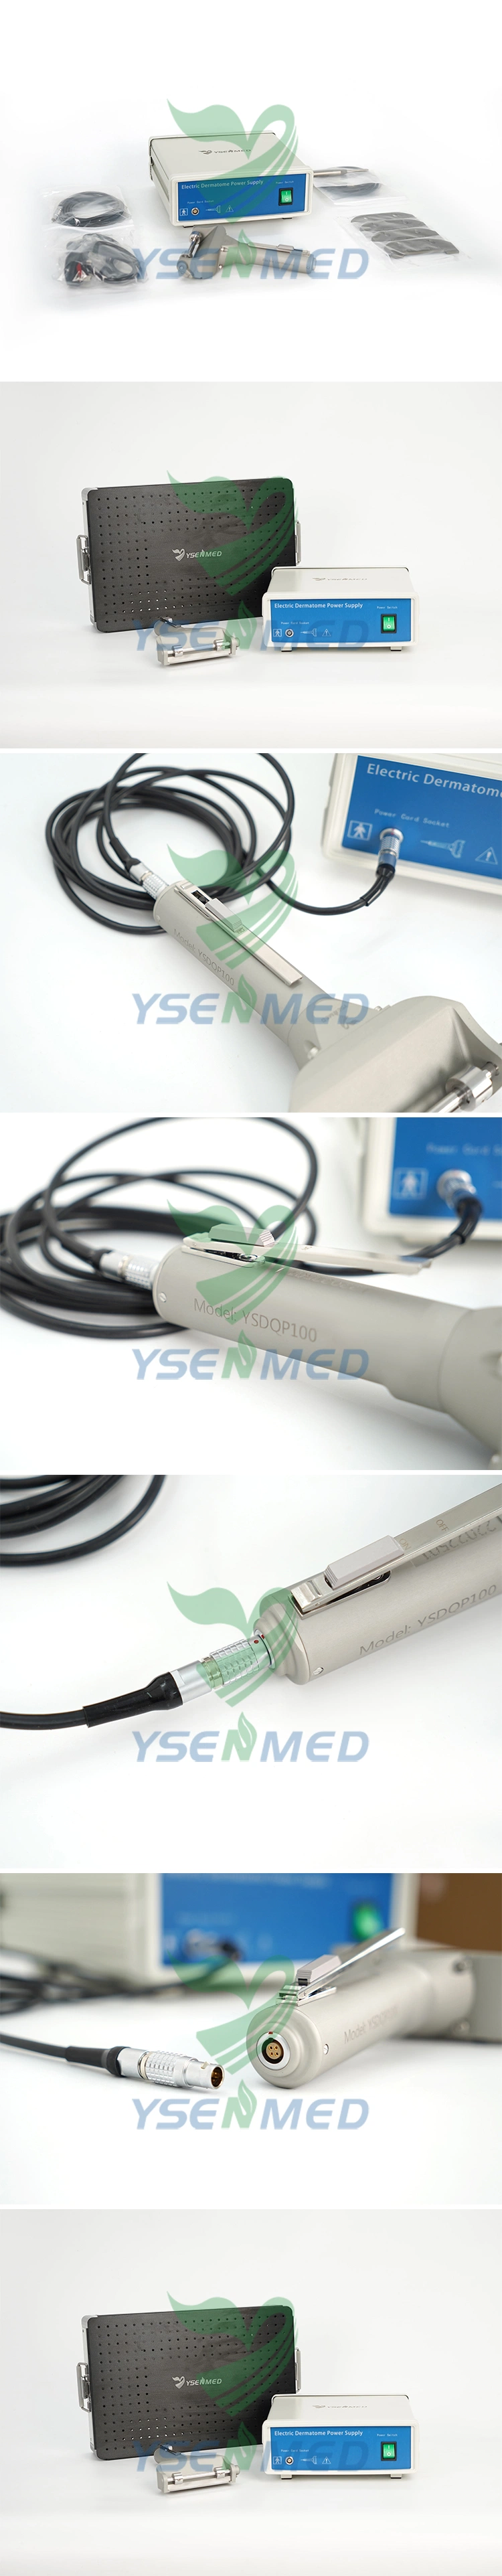 Ysdqp100 Hospital Medical Operating Equipment Surgical Electric Dermatome